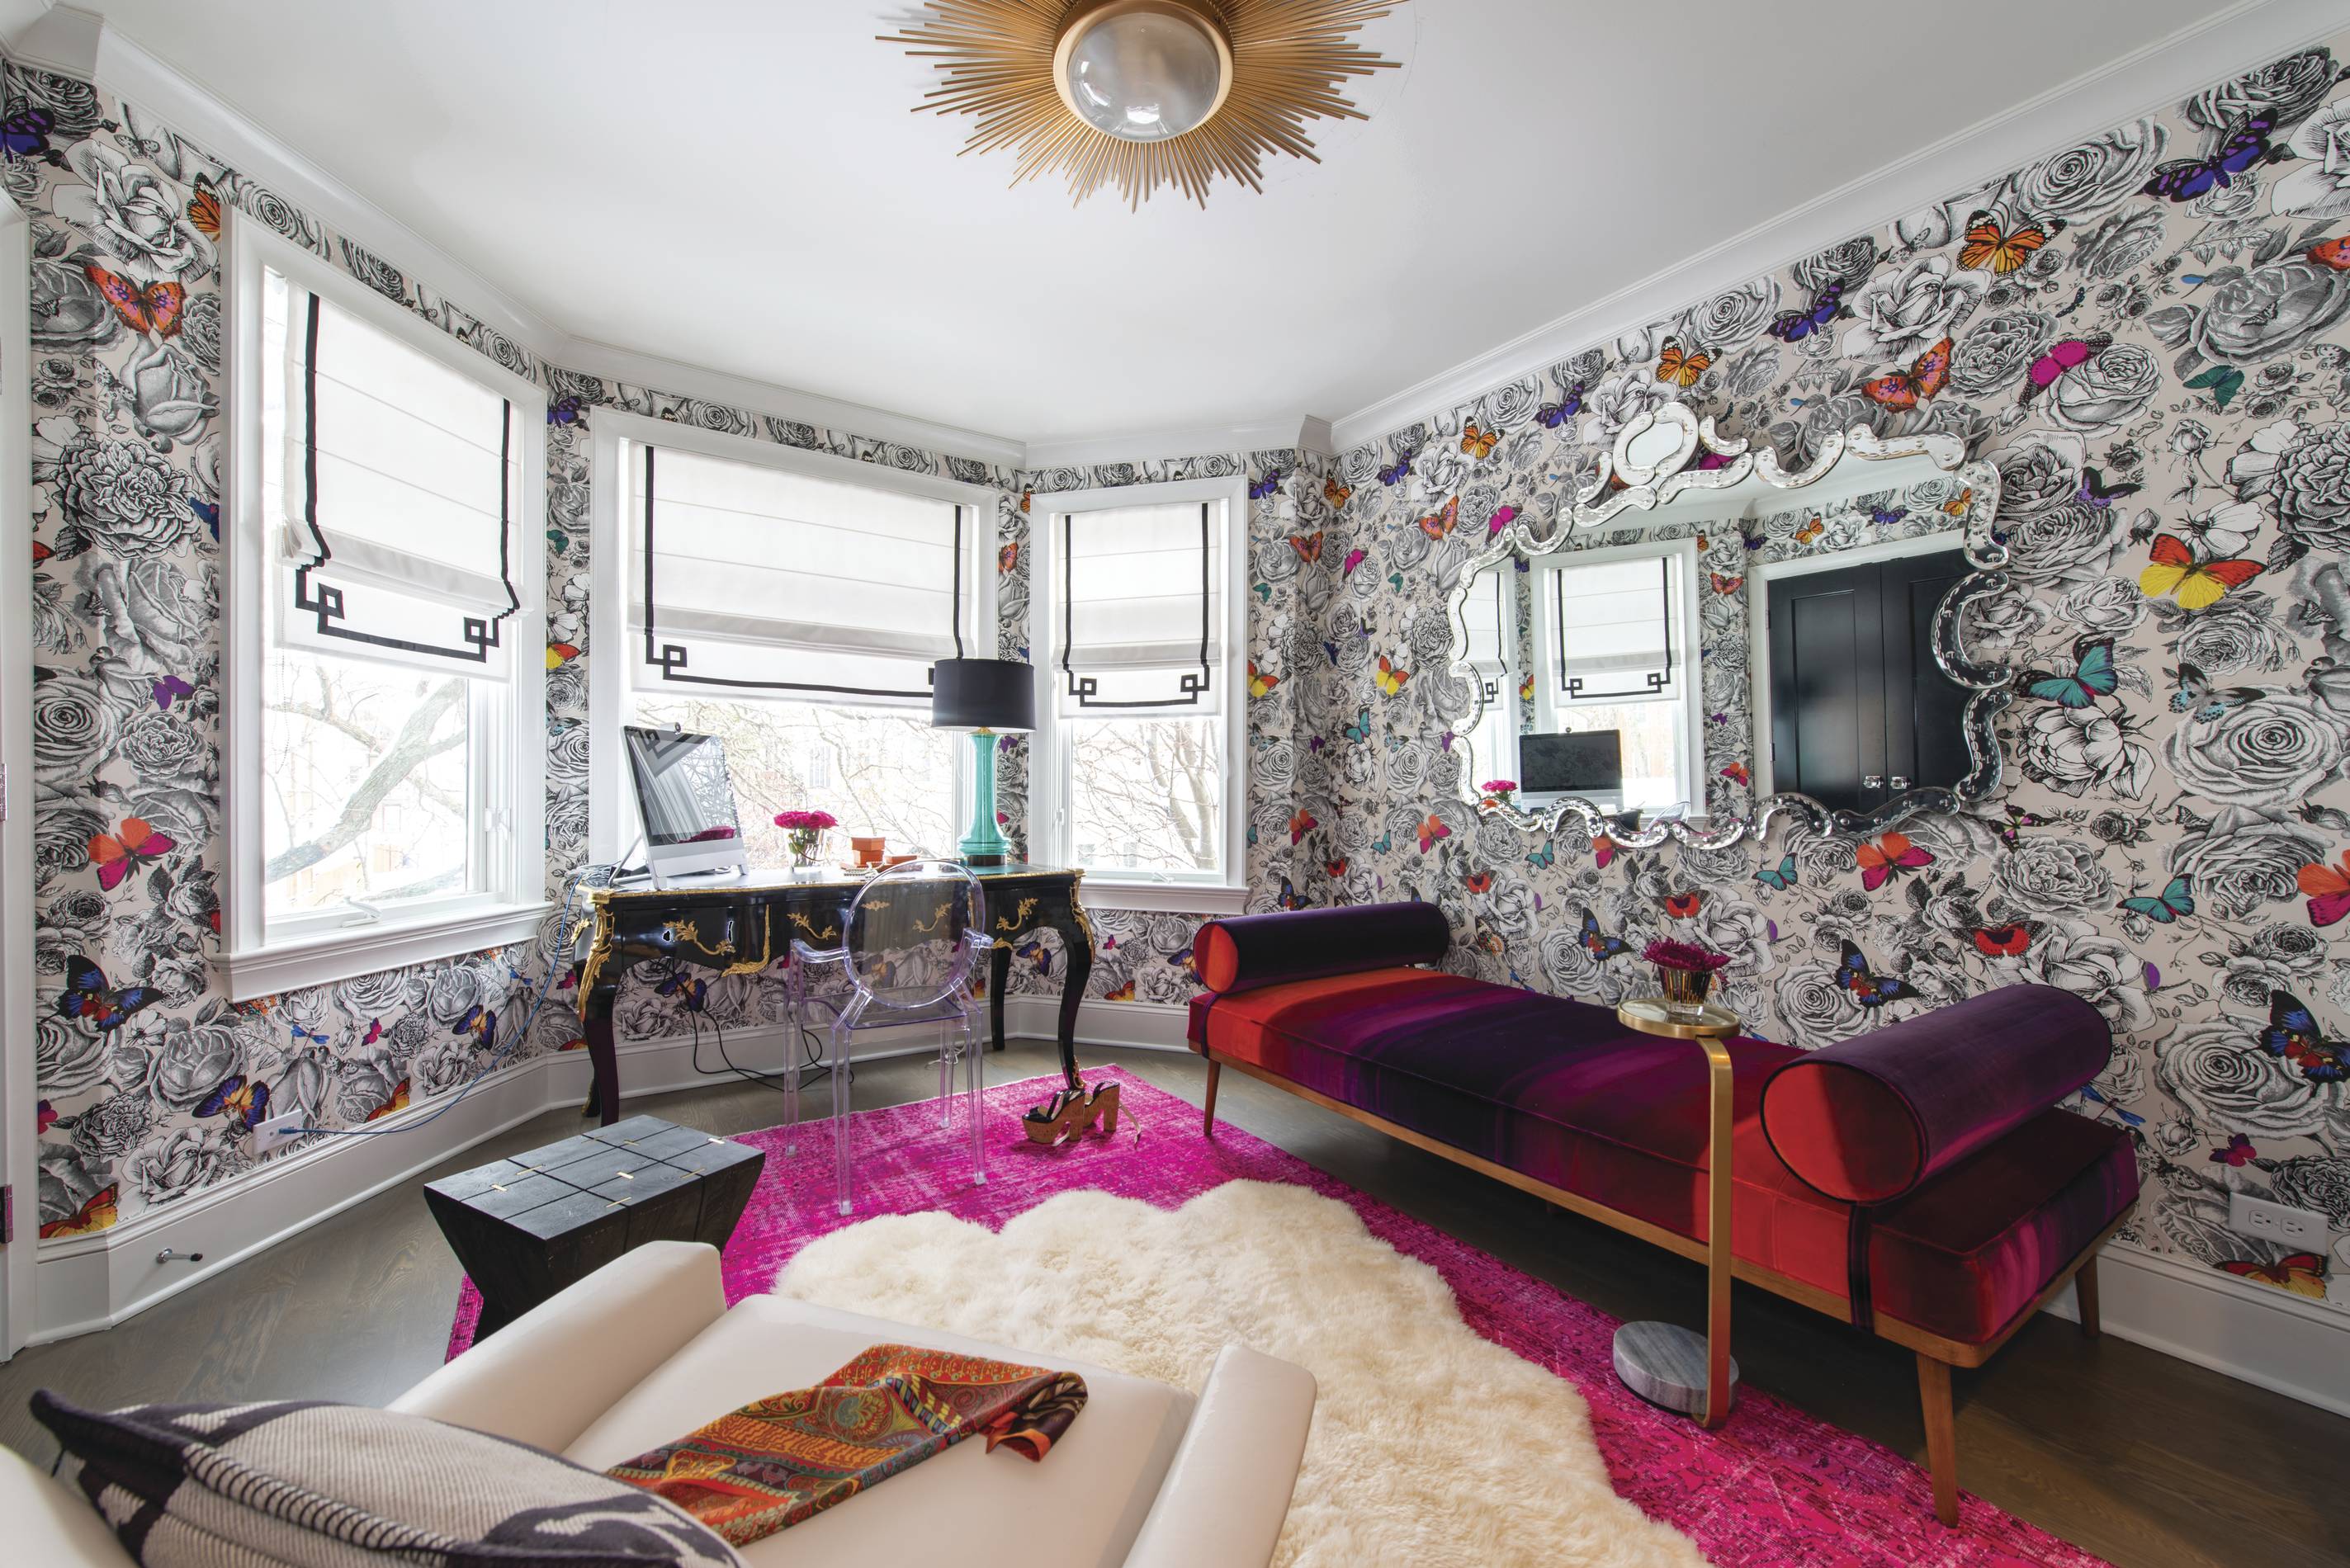 3 Of The Most Colorful Homes In America